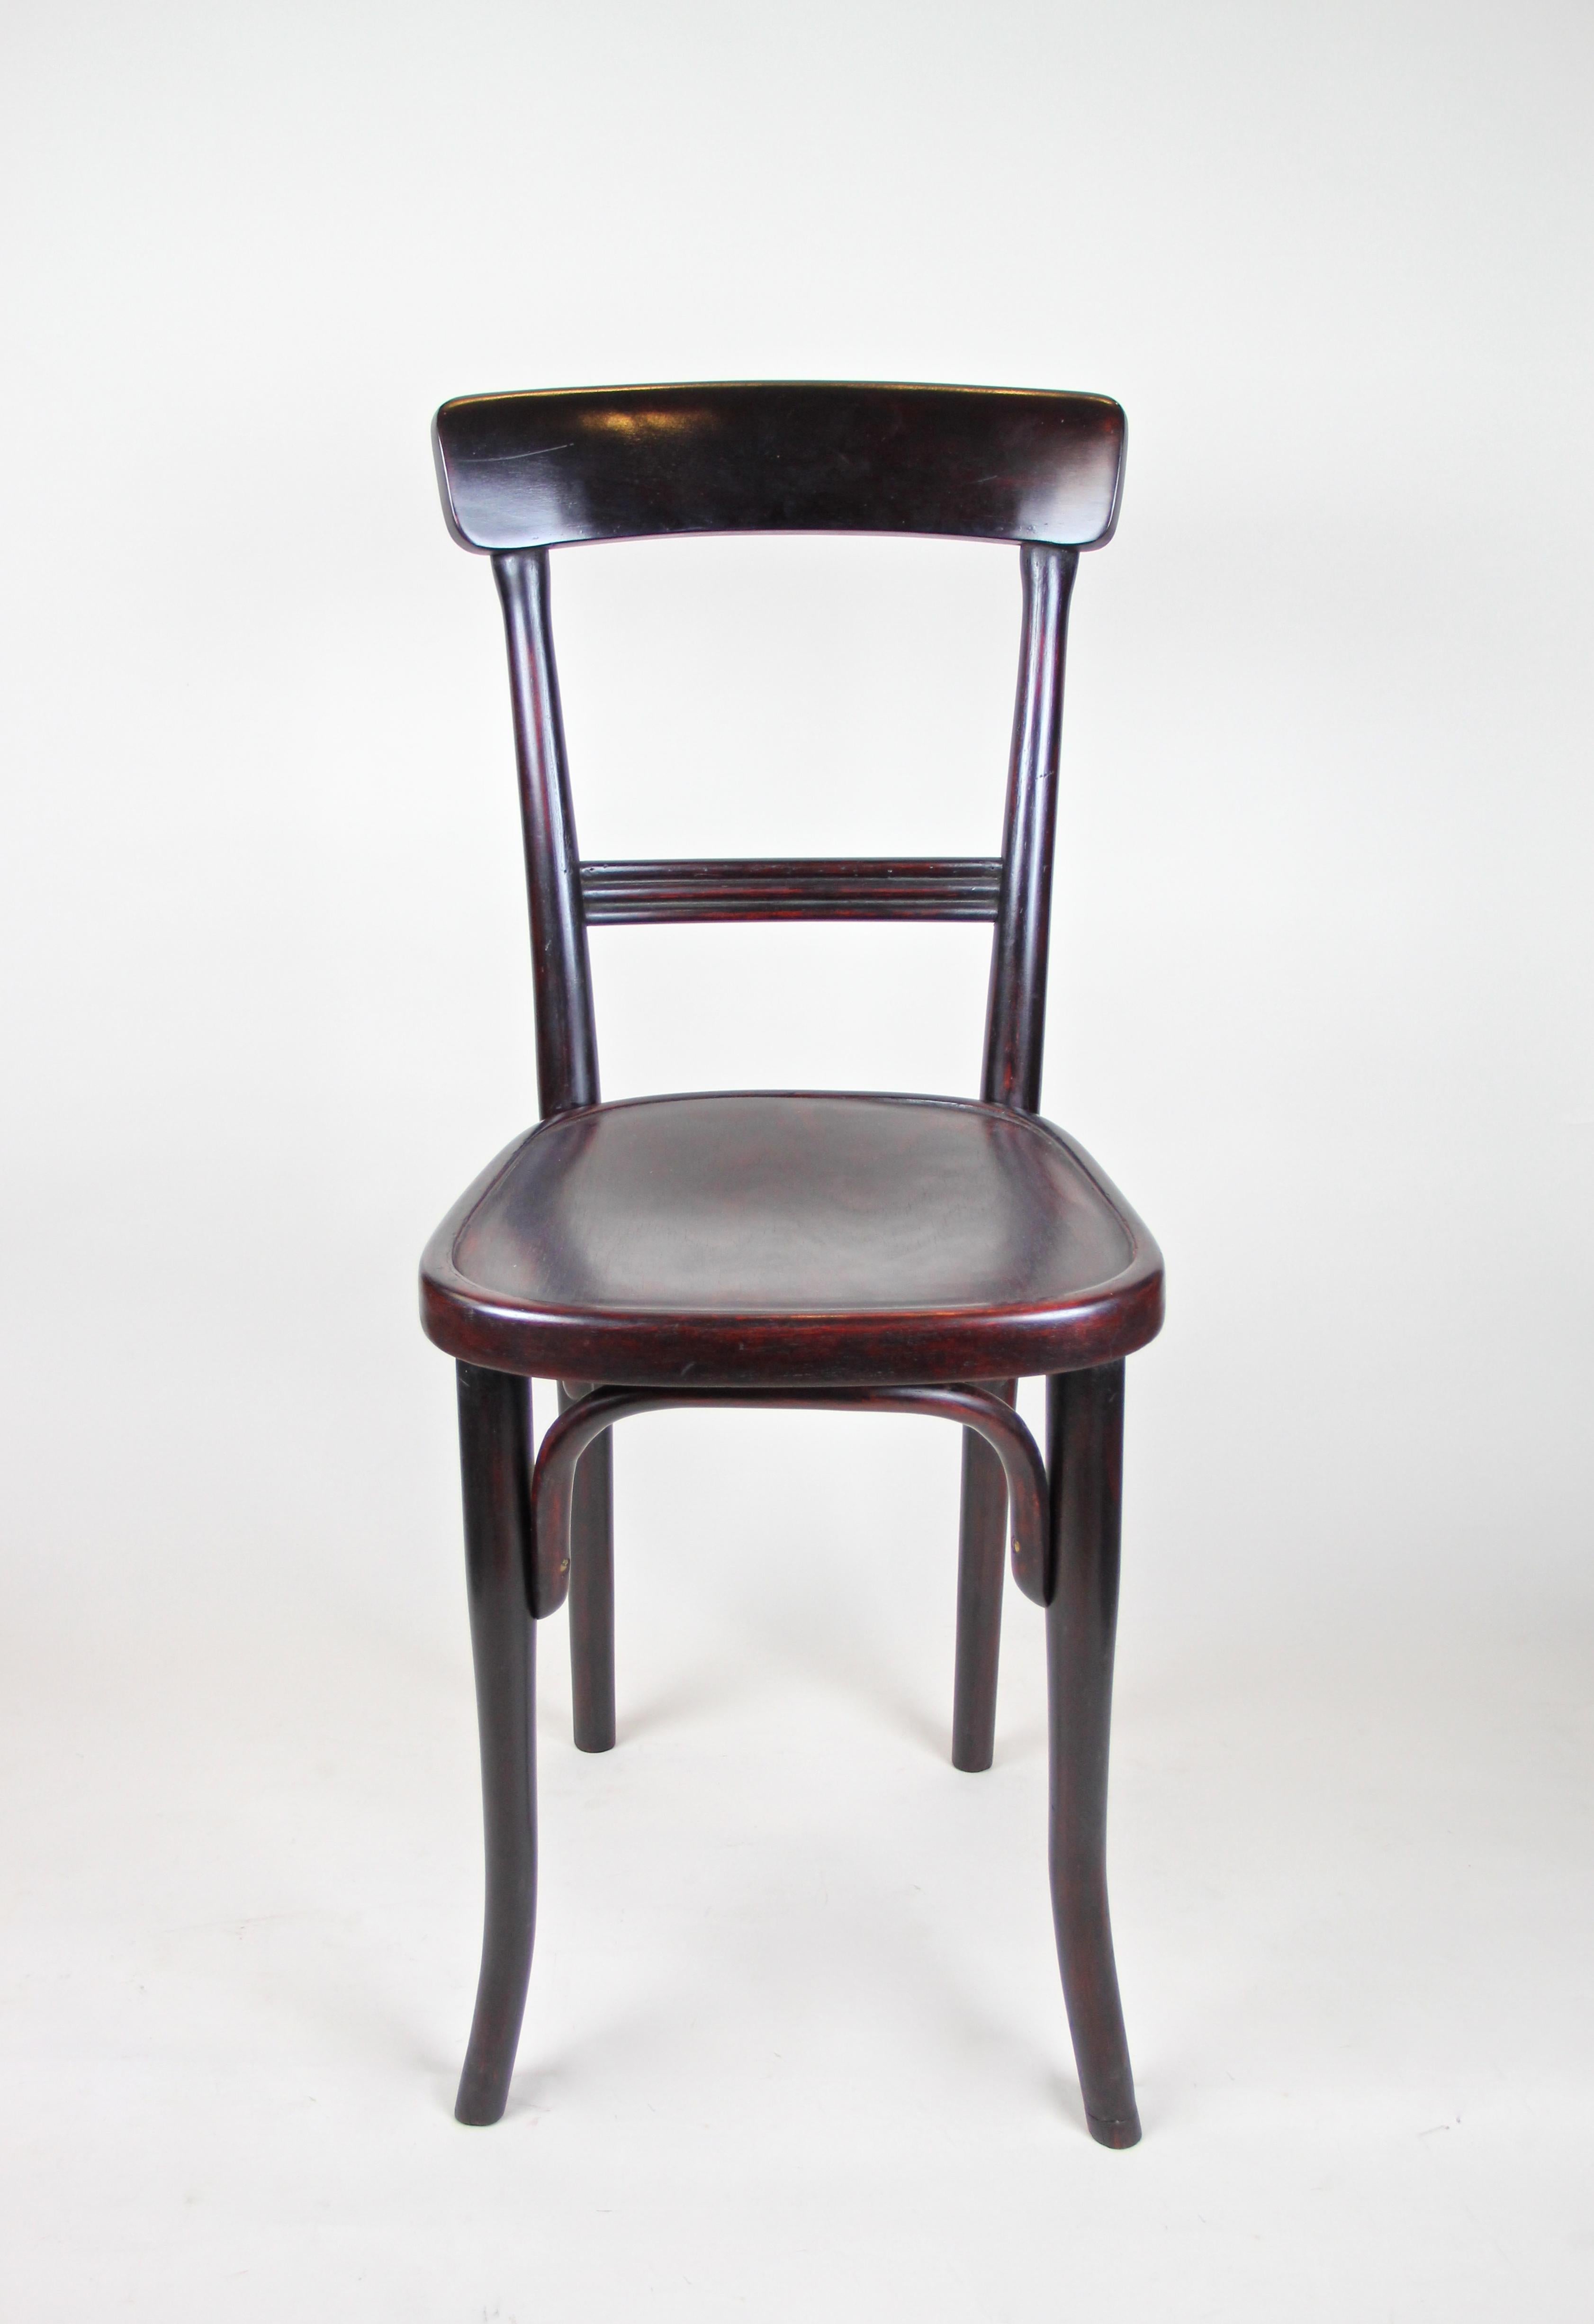 Wonderful bentwood chair by Thonet Vienna from Austria, circa 1910. The simple yet elegant shaped chair shows a beautiful dark mahogany tone and comes in good restored condition. This early 20th century bentwood chair is marked with the paper mark